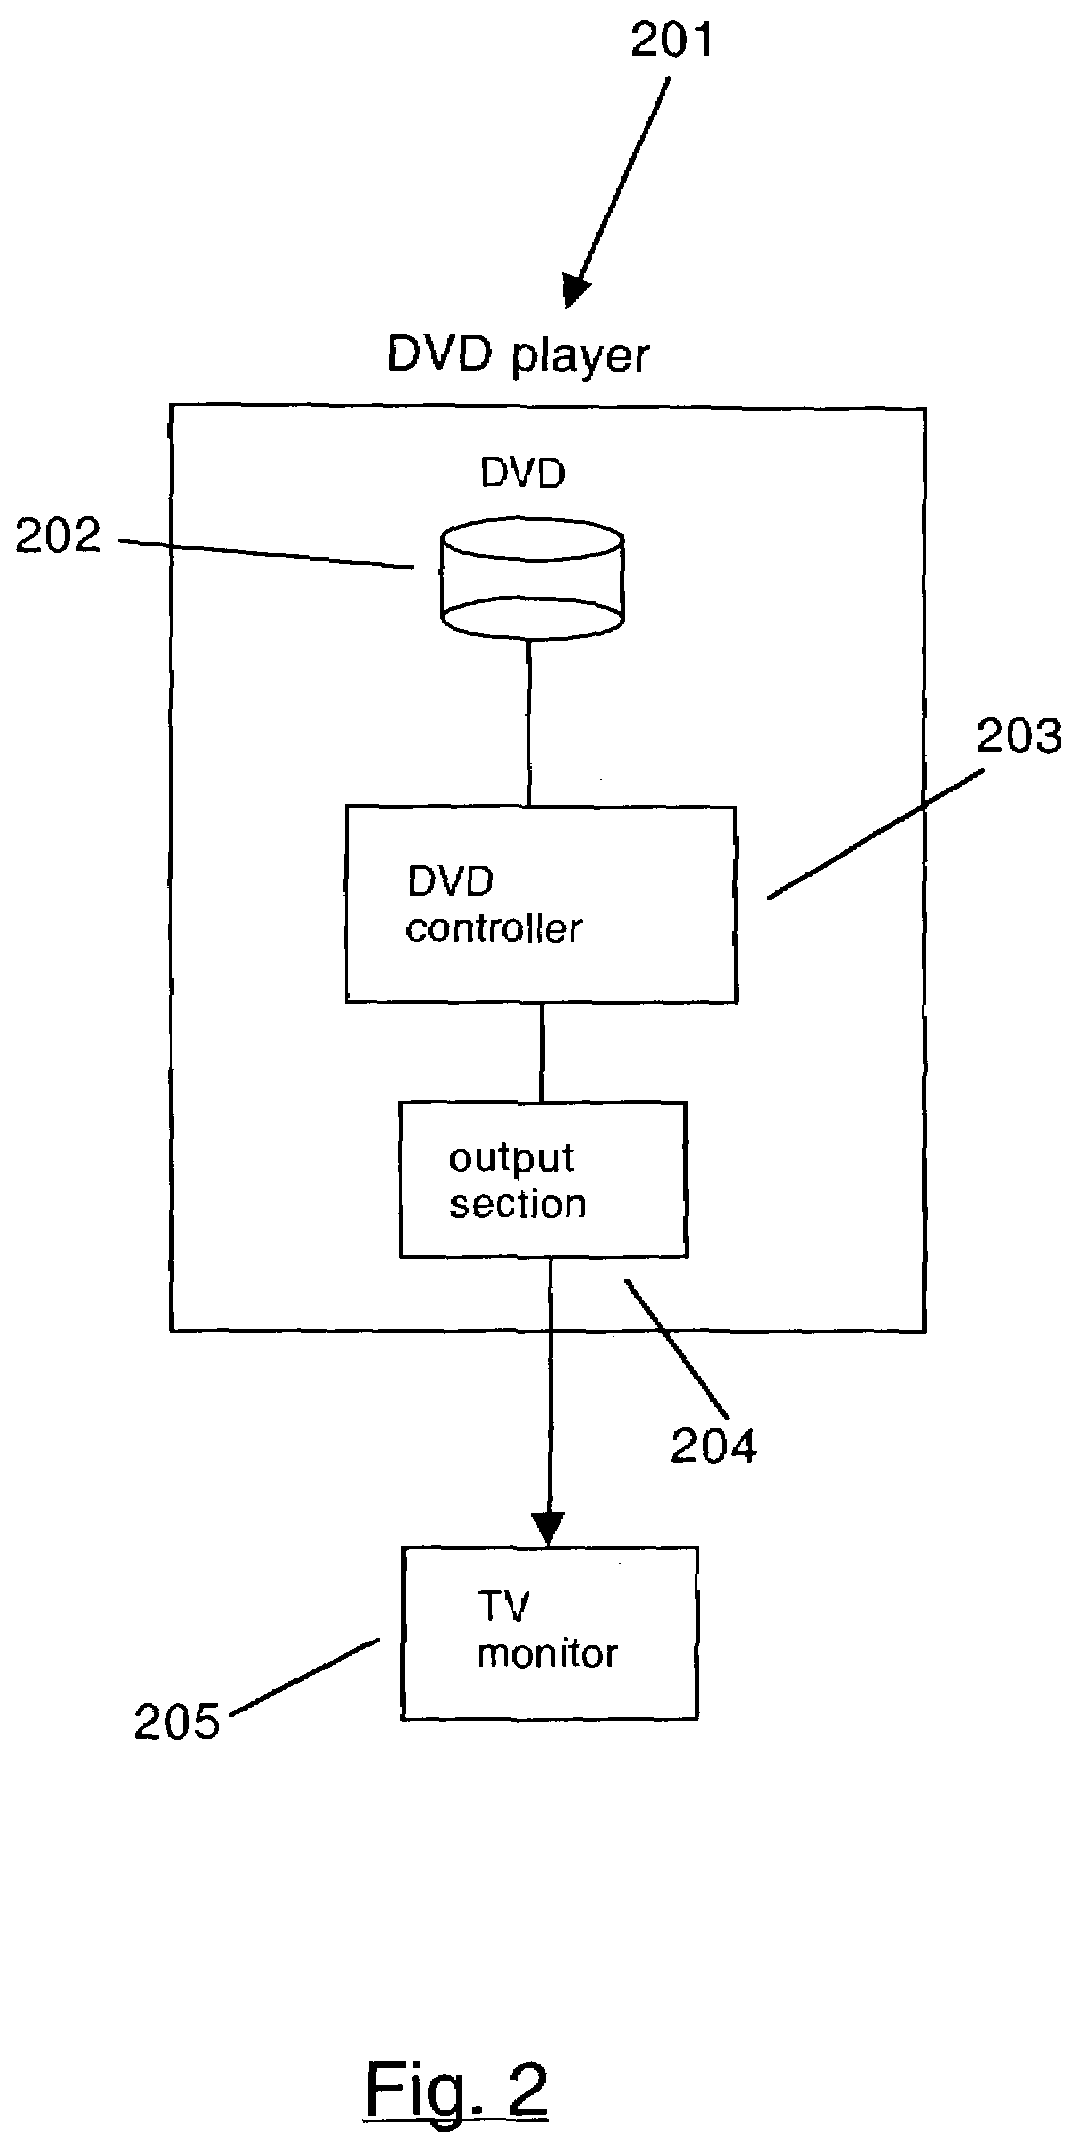 Method and apparatus for creating an expanded functionality digital video disc